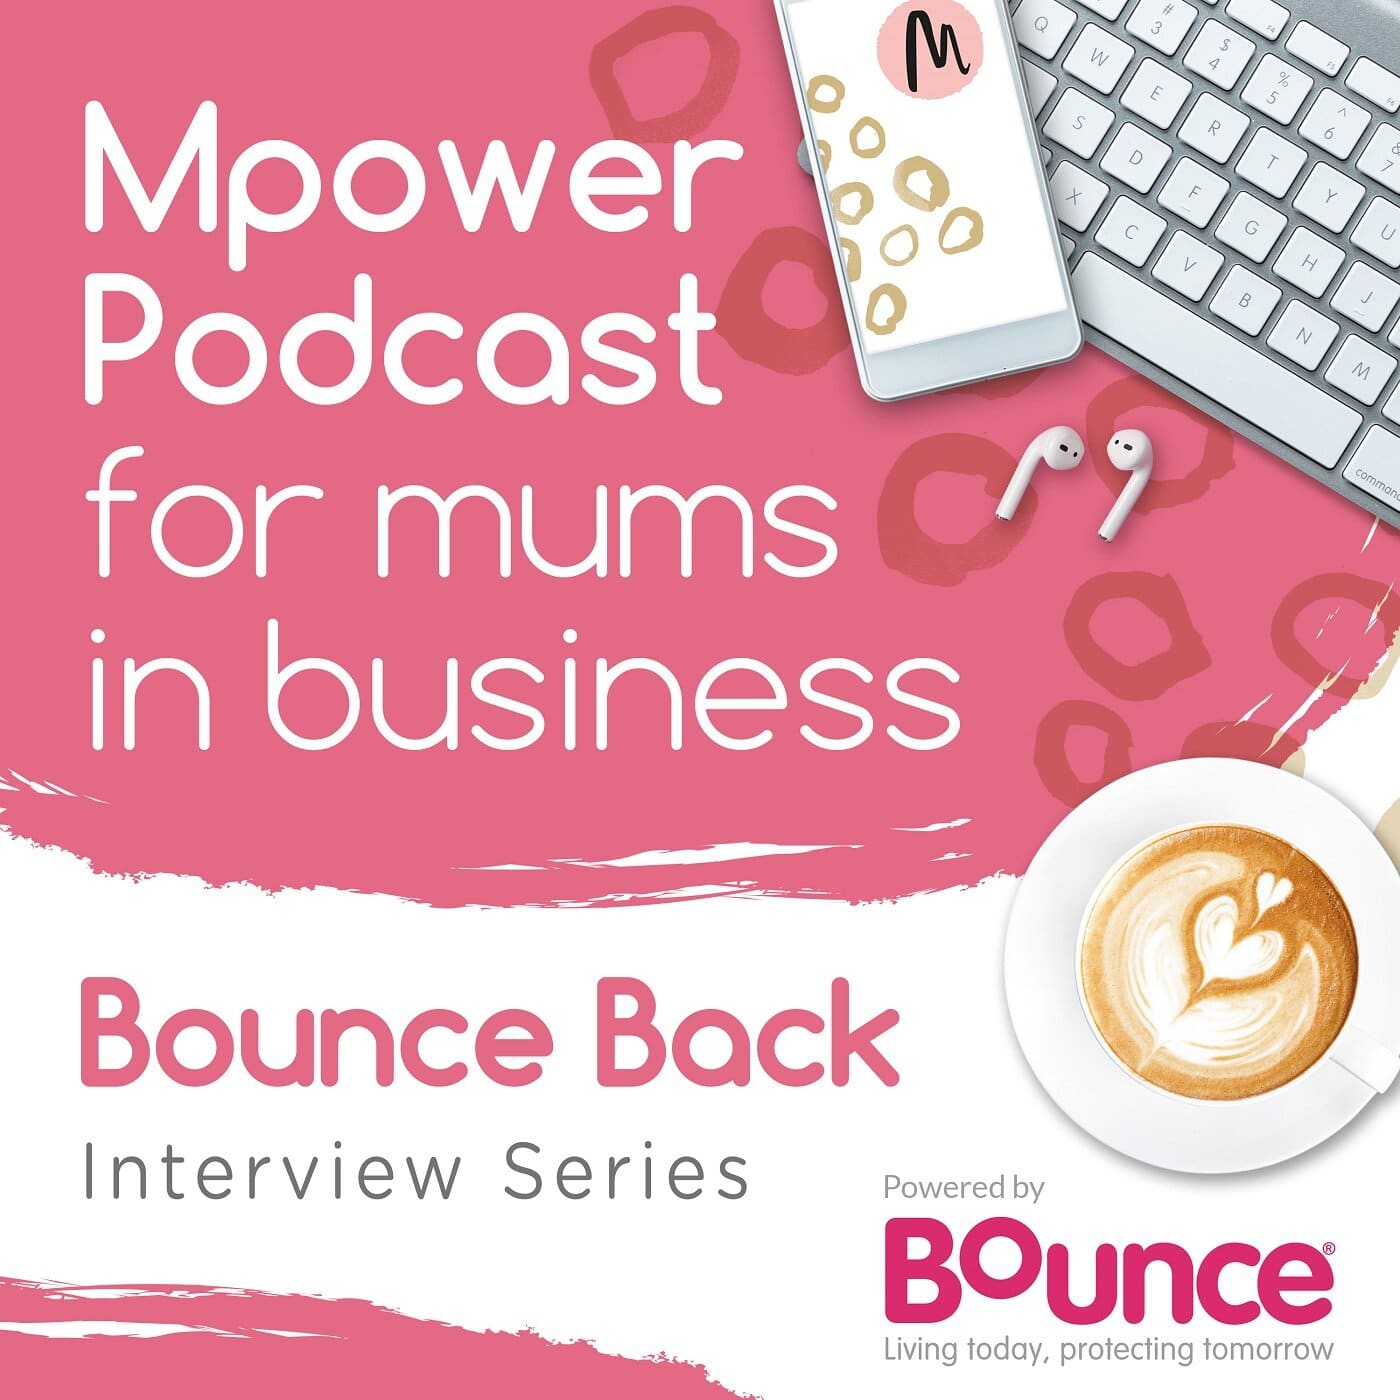 Artwork for Mpower Podcast for mums in business